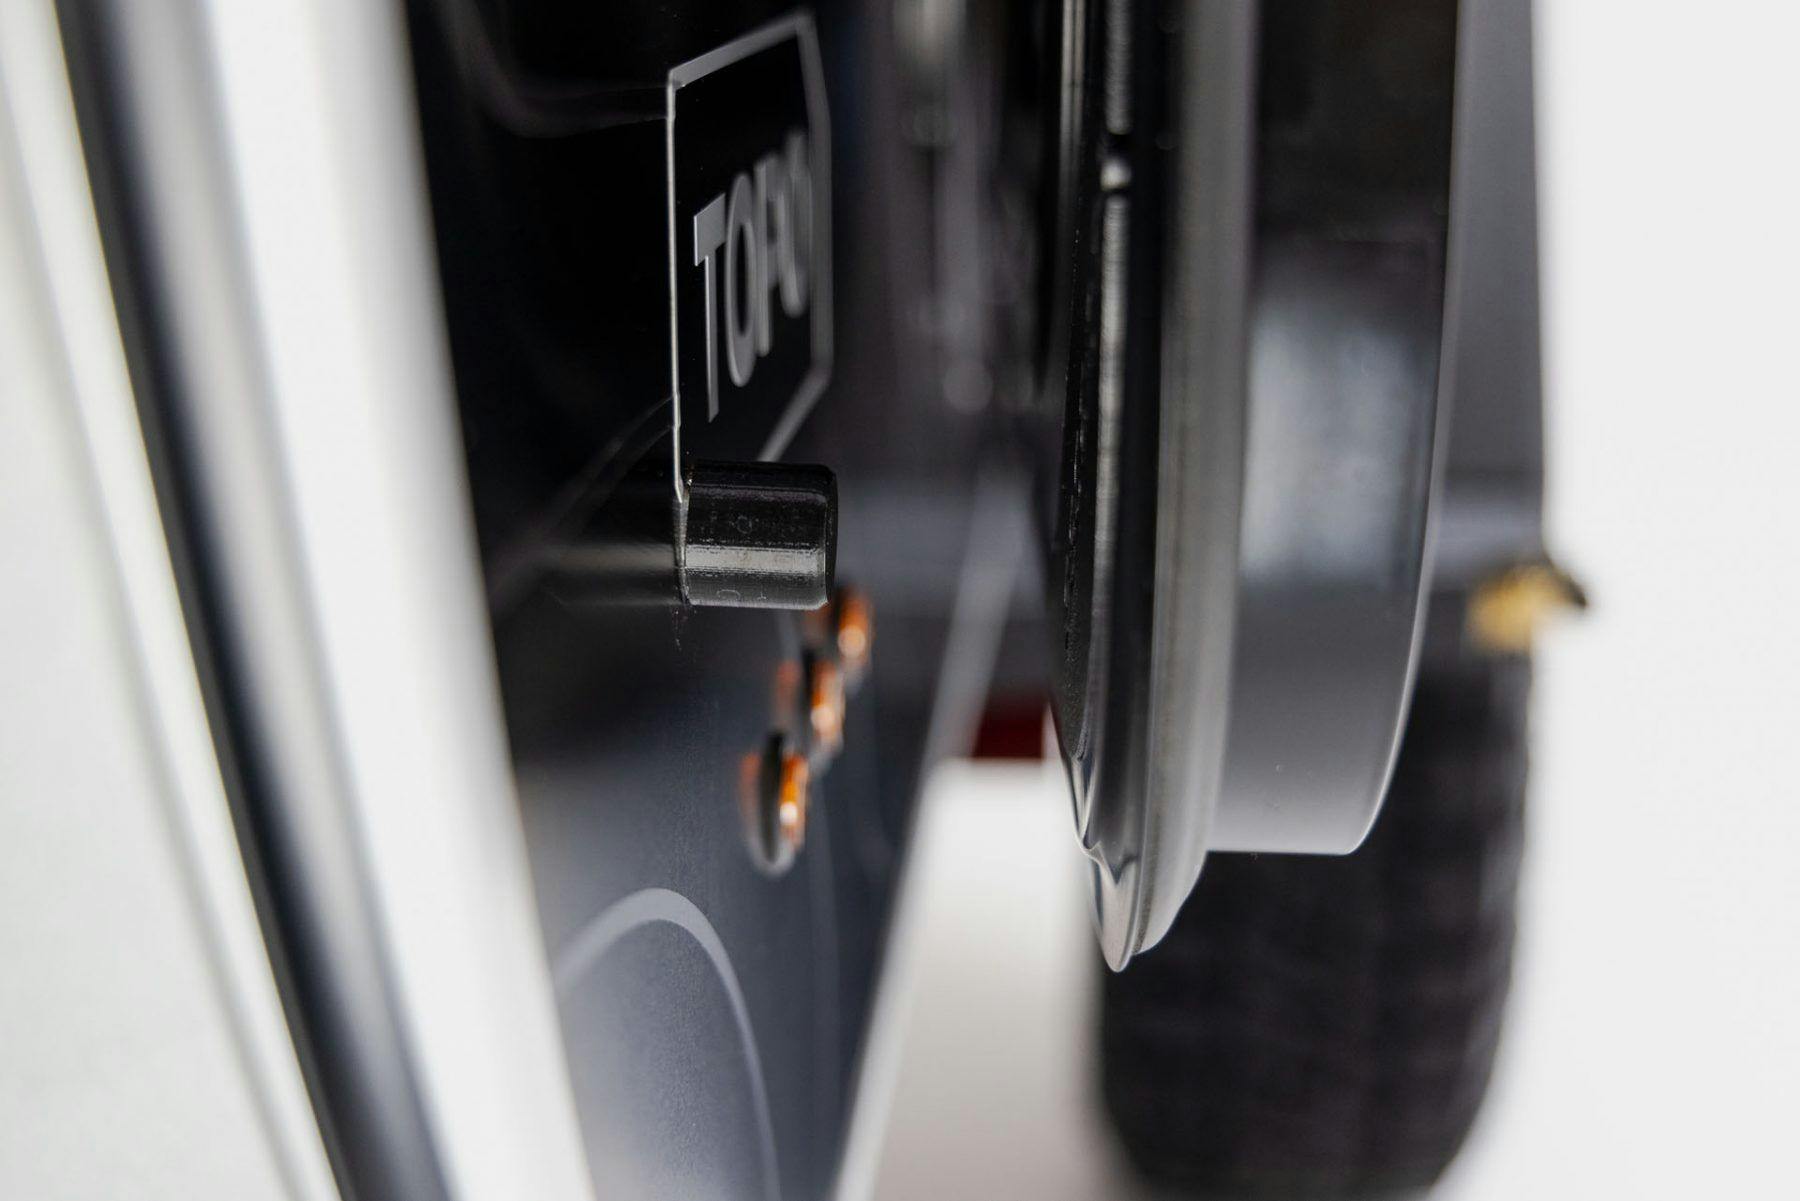 Details of a 3D printed magnetic door catch on a teardrop trailer.